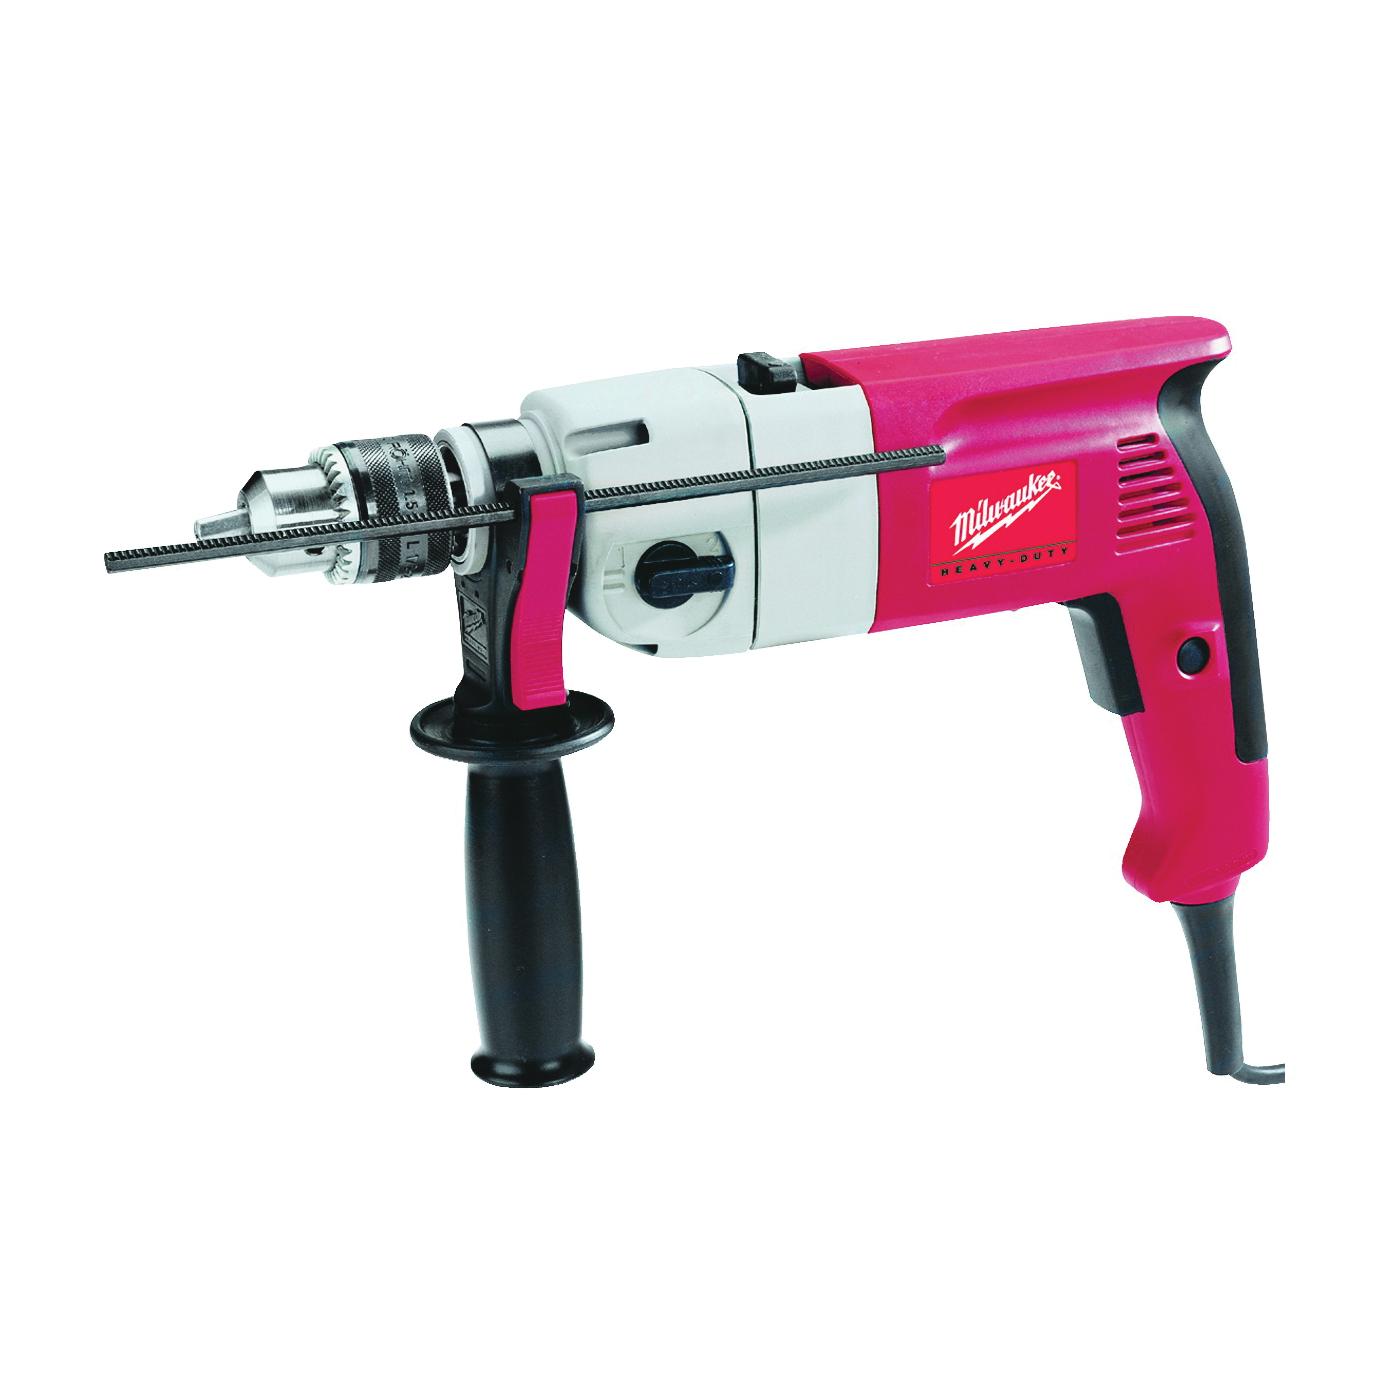 5378-20 Hammer Drill, 7.5 A, Keyed Chuck, 1/2 in Chuck, 0 to 2500 rpm Speed